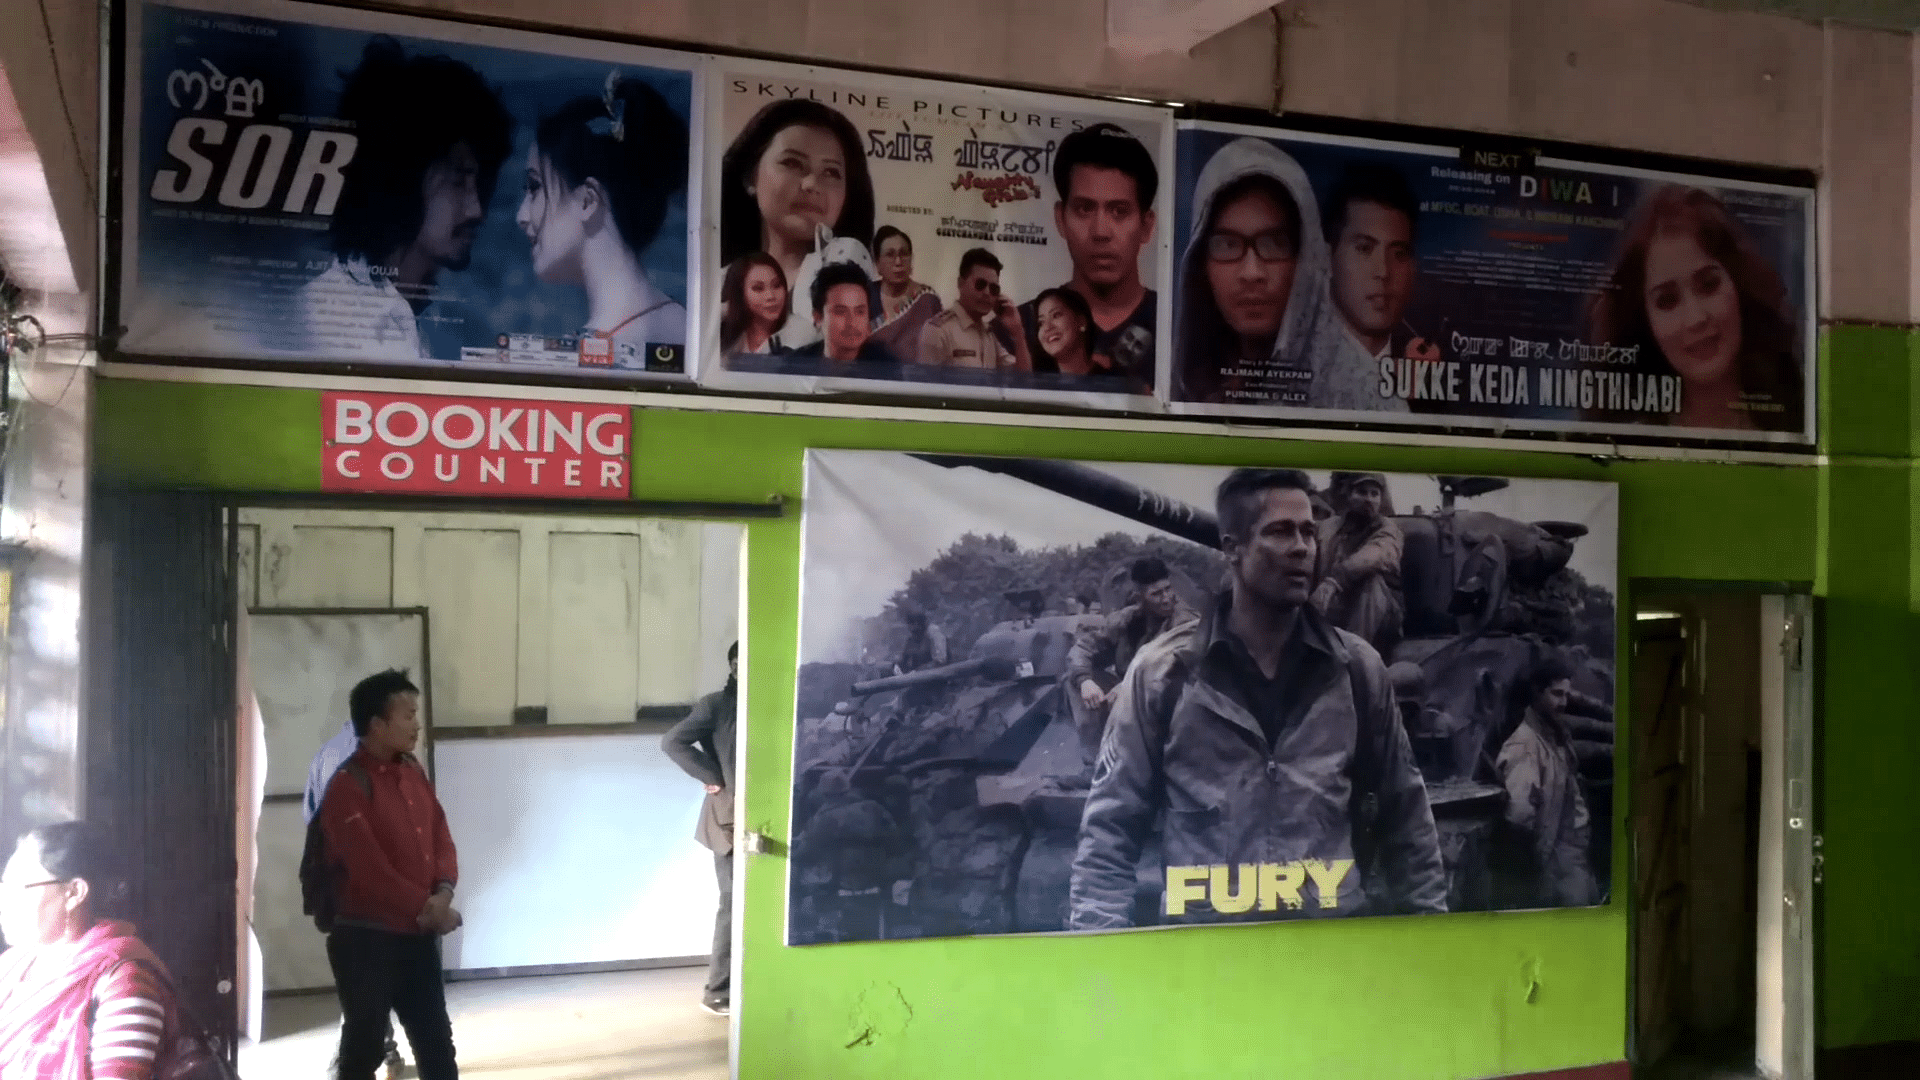 Revolutionary People’s Front (RPF) and the People’s Liberation Army (PLA) have banned Hindi film screenings in Manipur. (Photo: Sunzu Bachaspatimayum/The Quint)